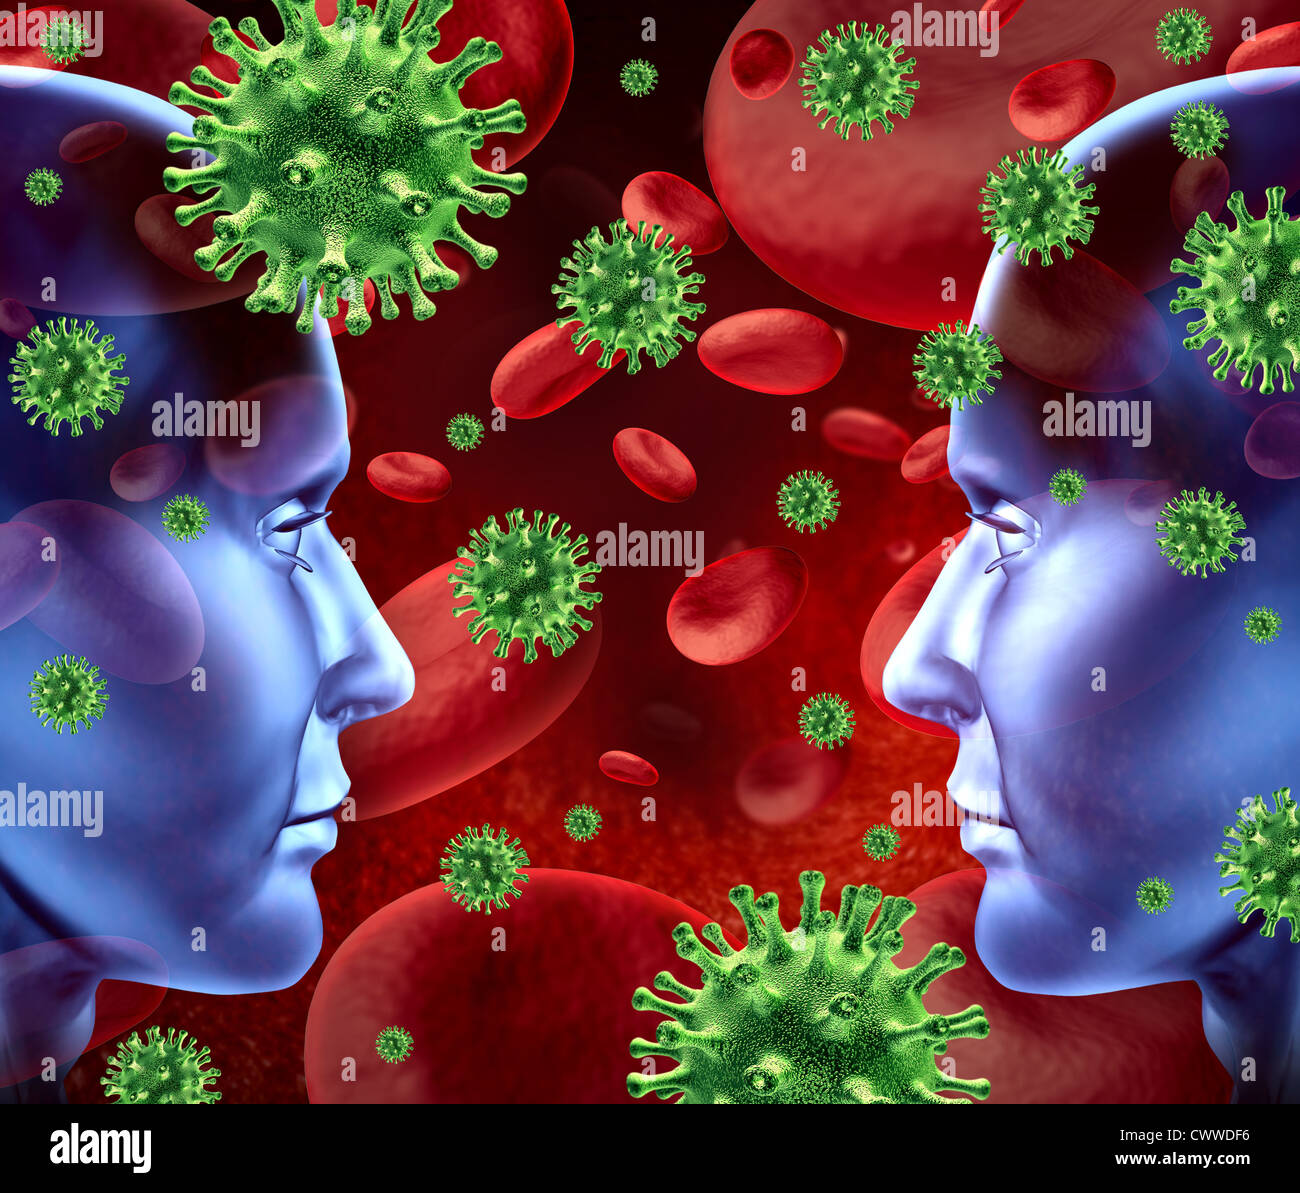 Contagious viral disease in the blood symbol representing a medical health concept of bacterial transfer and spread of infection Stock Photo